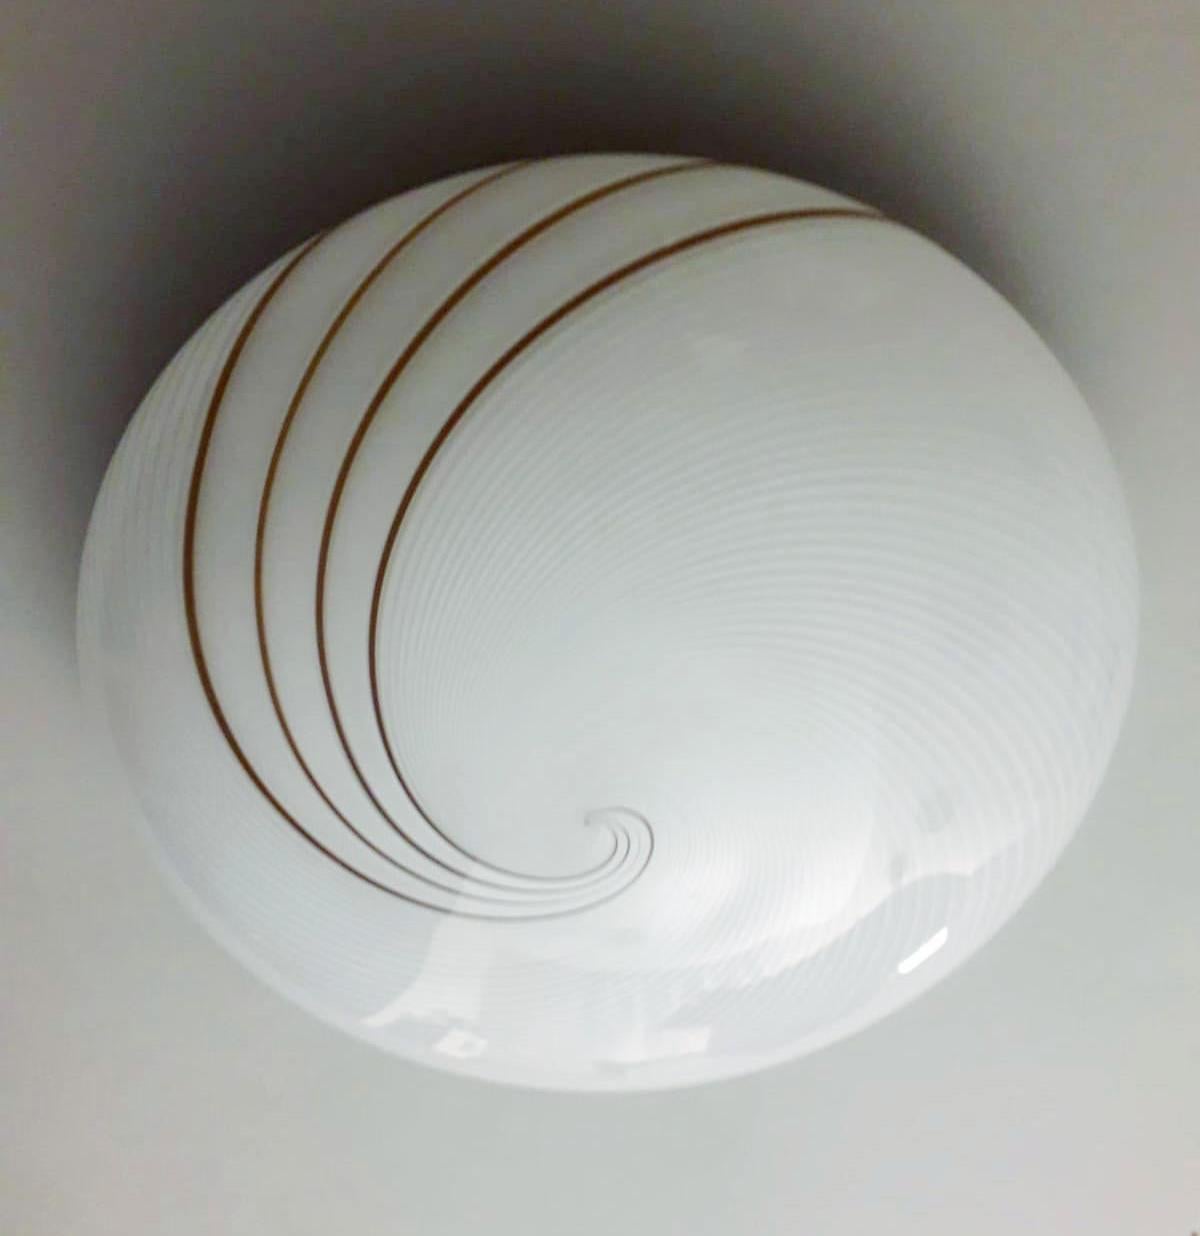 Vintage Italian flush mount or wall light with a single Murano glass shade with ribbed spiral pattern in frosted white and brown colors, mounted white metal frame, in the style of Venini / Made in Italy circa 1960s
Measures: diameter 16 inches,